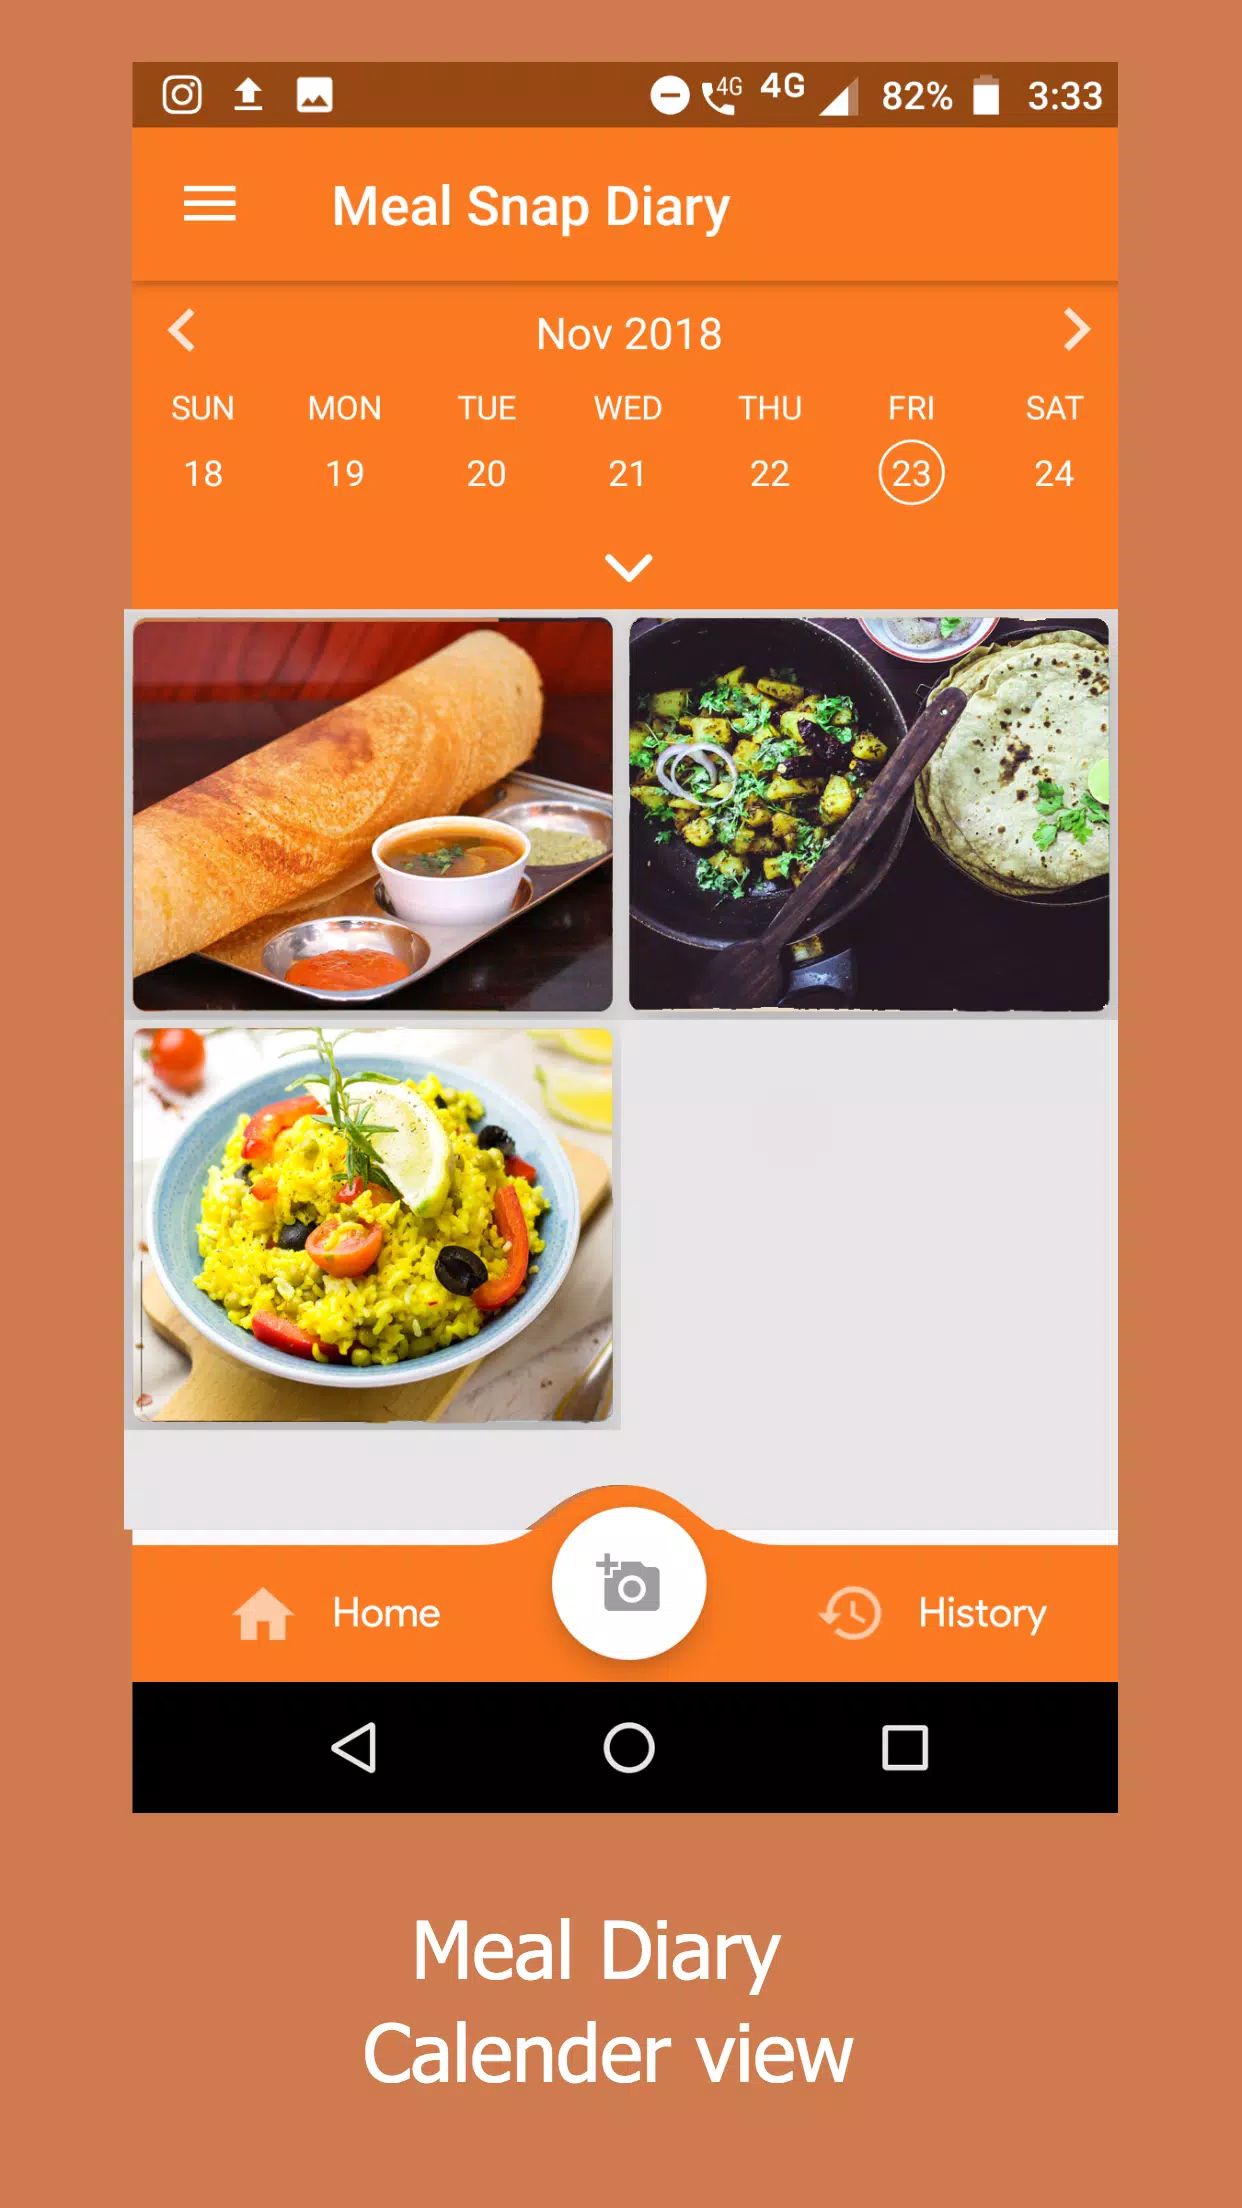 Meal Snap Diary for Android - APK Download